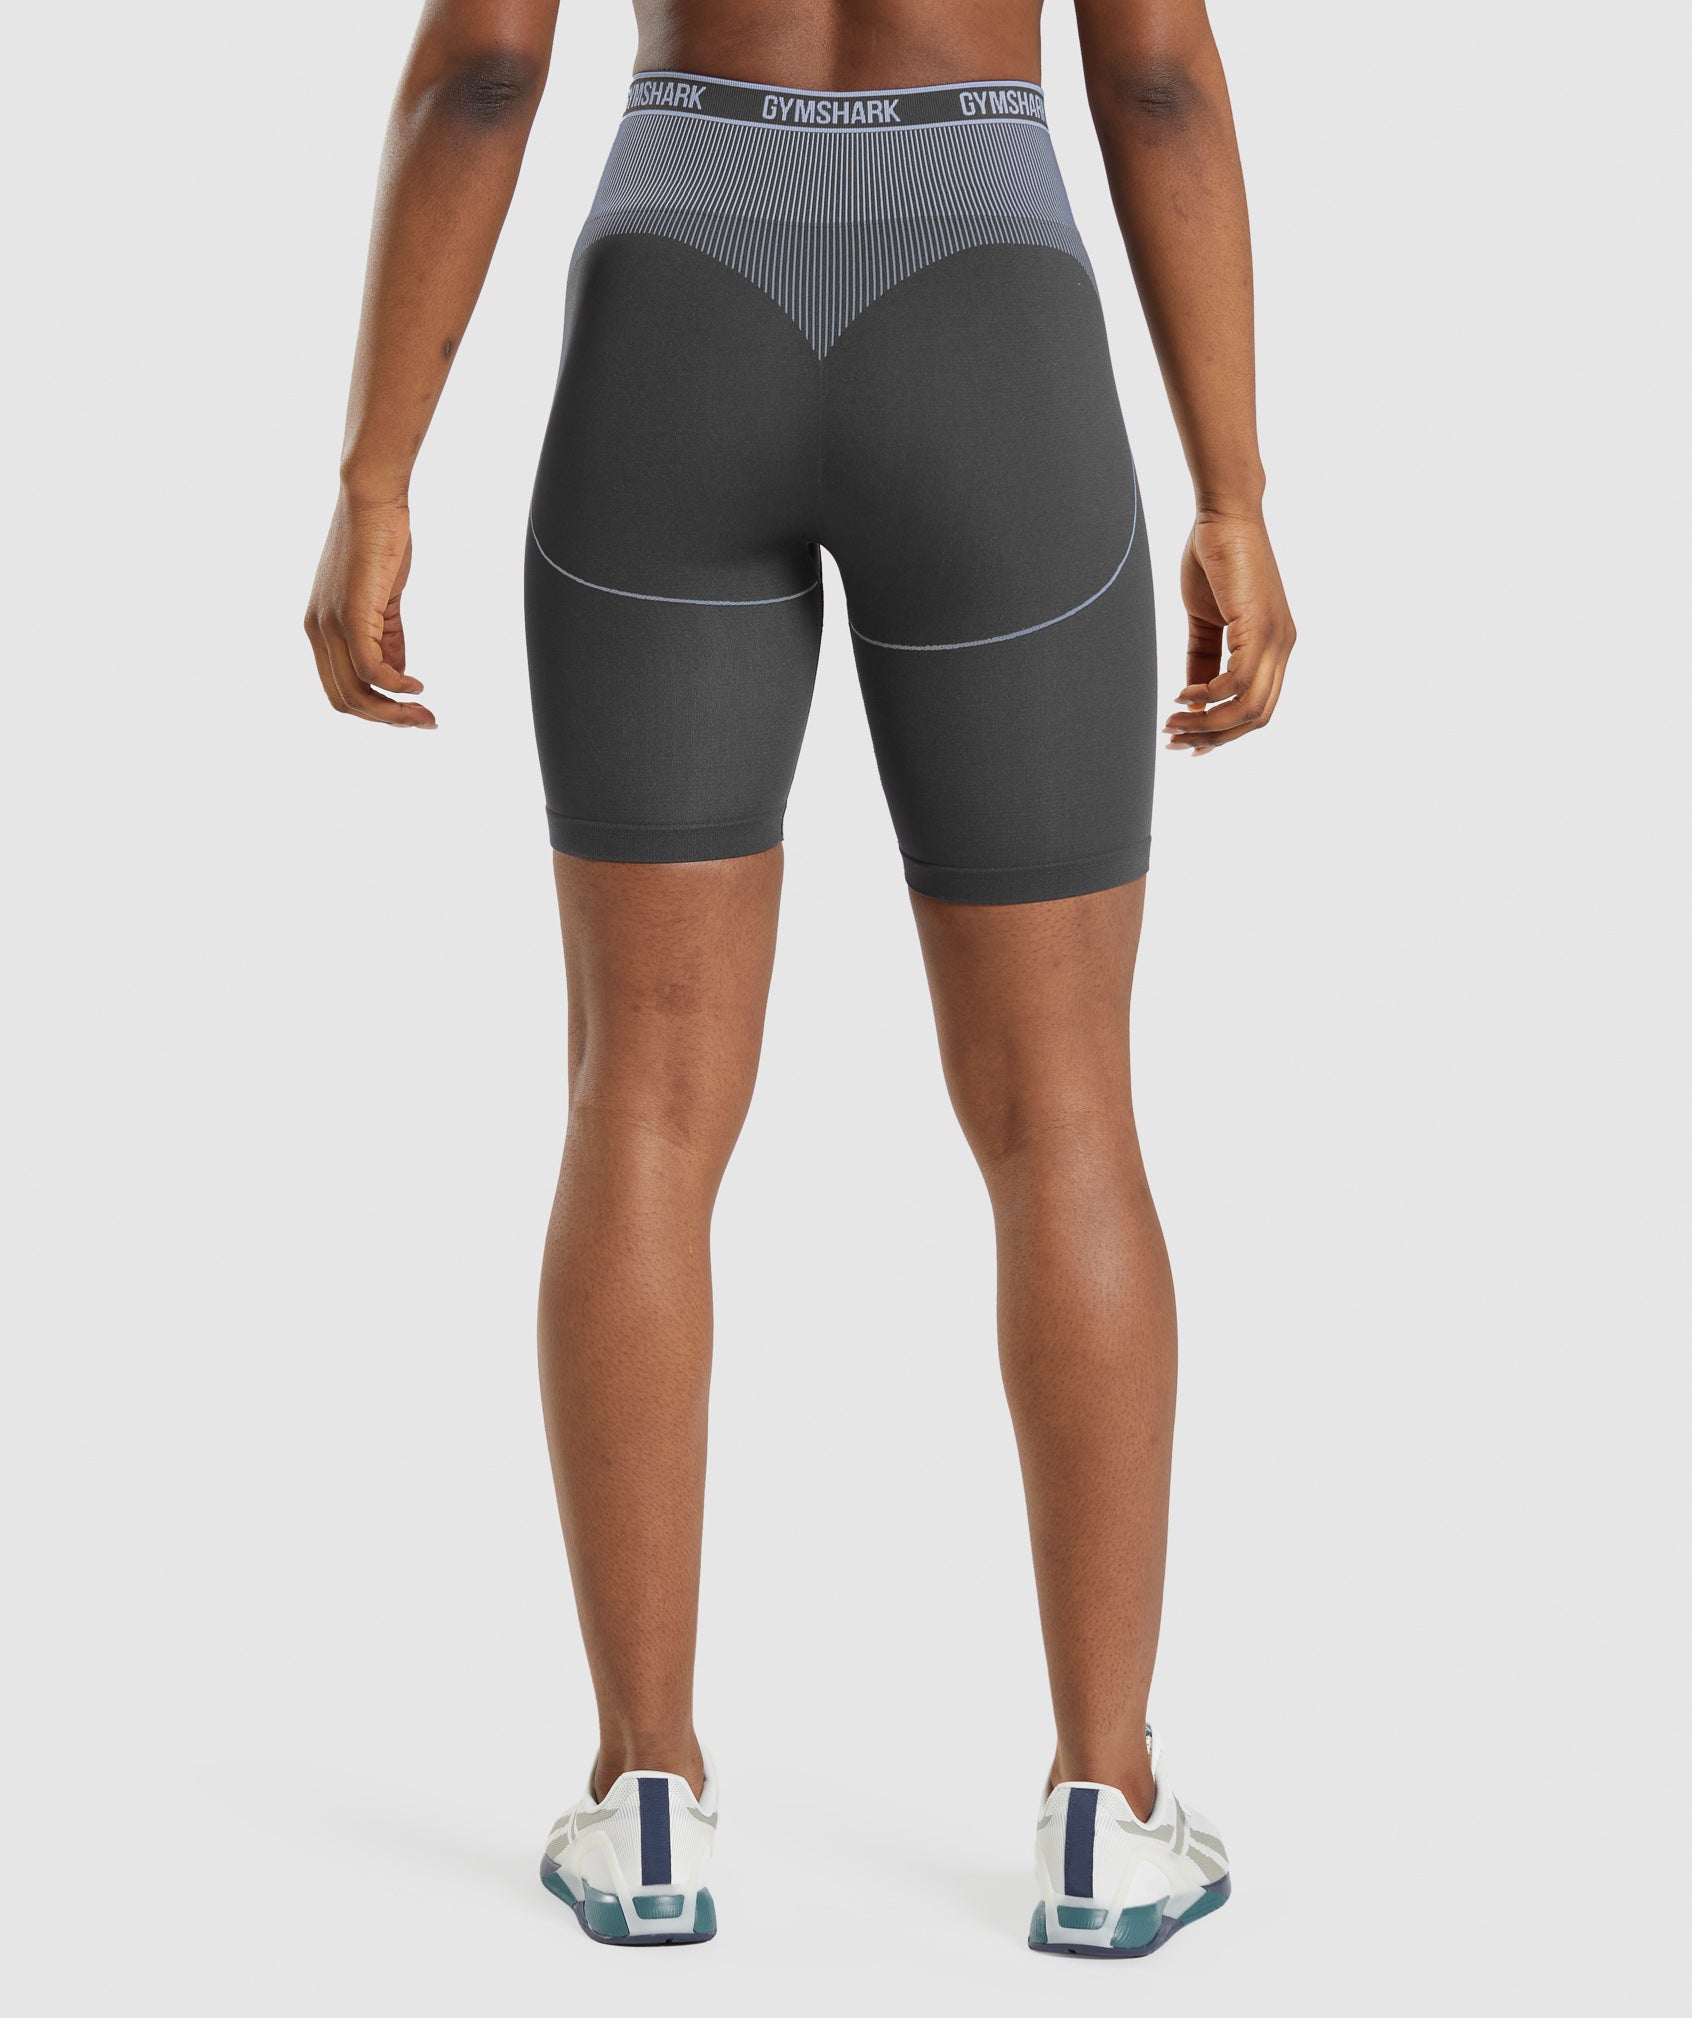 Apex Seamless High Rise Short in Onyx Grey/Lavender Blue - view 2